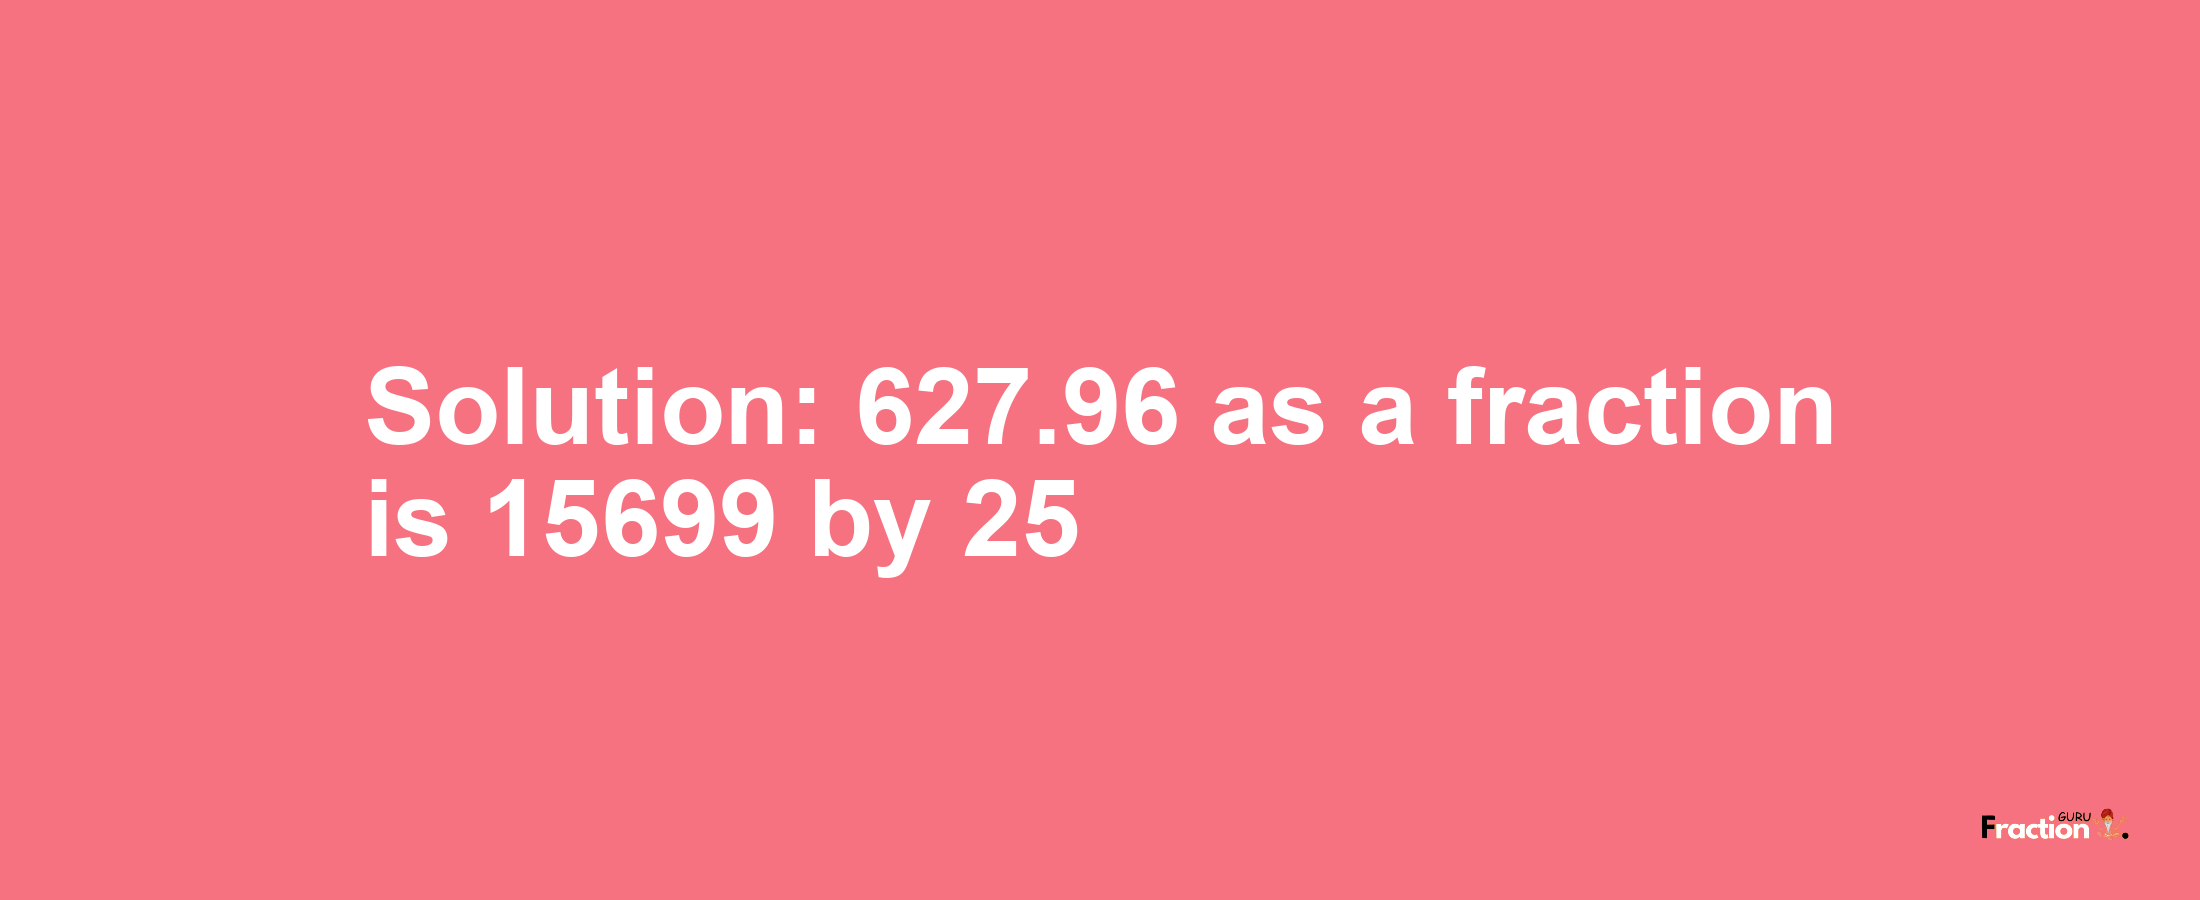 Solution:627.96 as a fraction is 15699/25